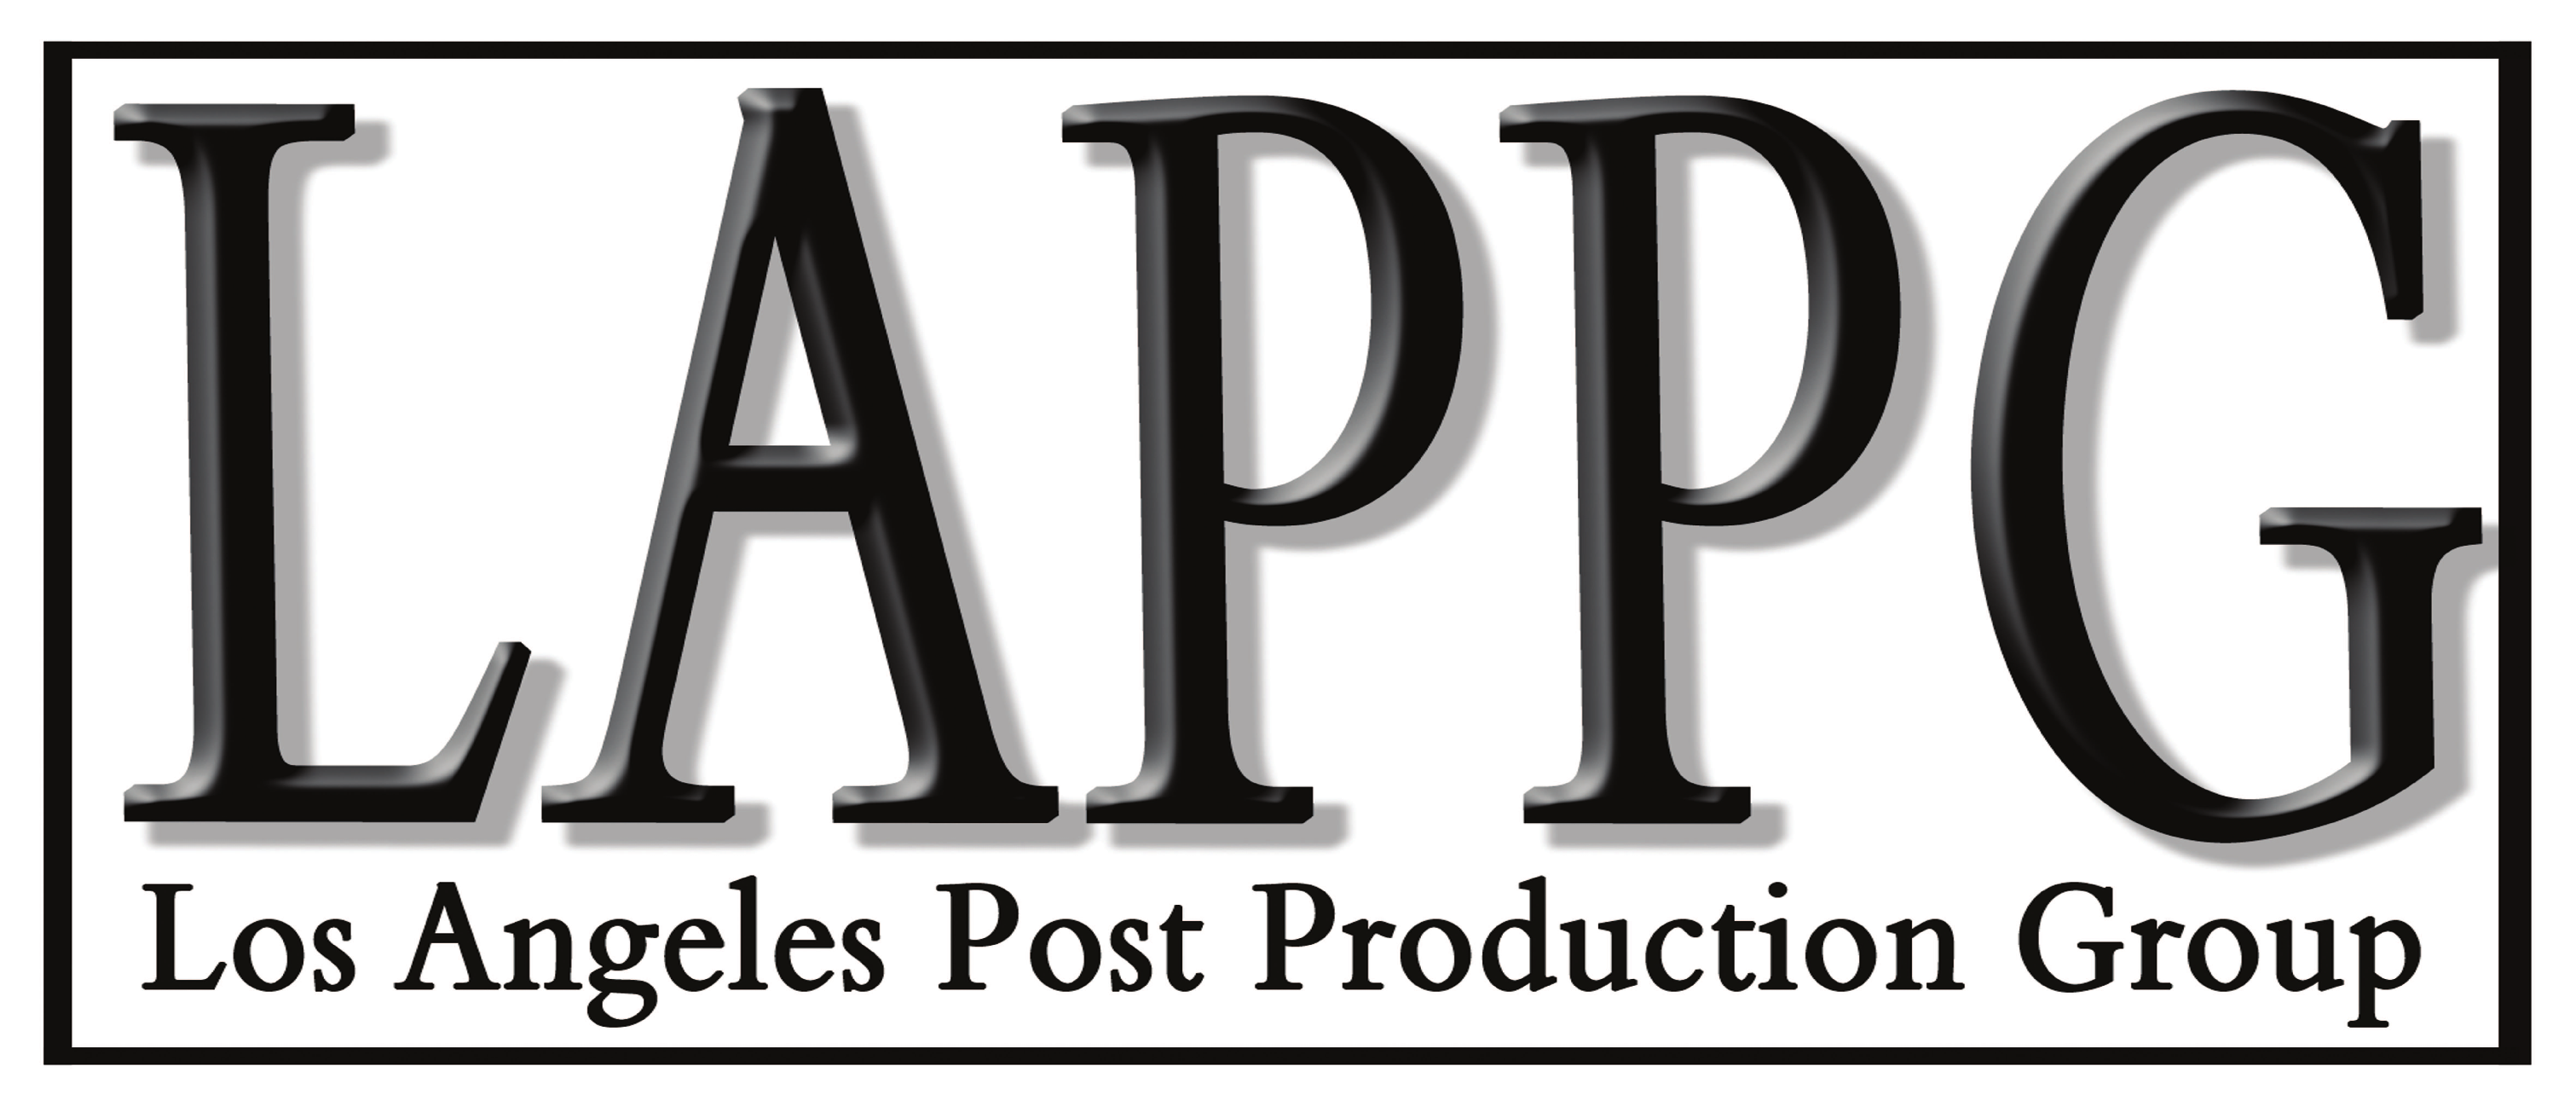 Los Angeles Post Production Group (LAPPG)